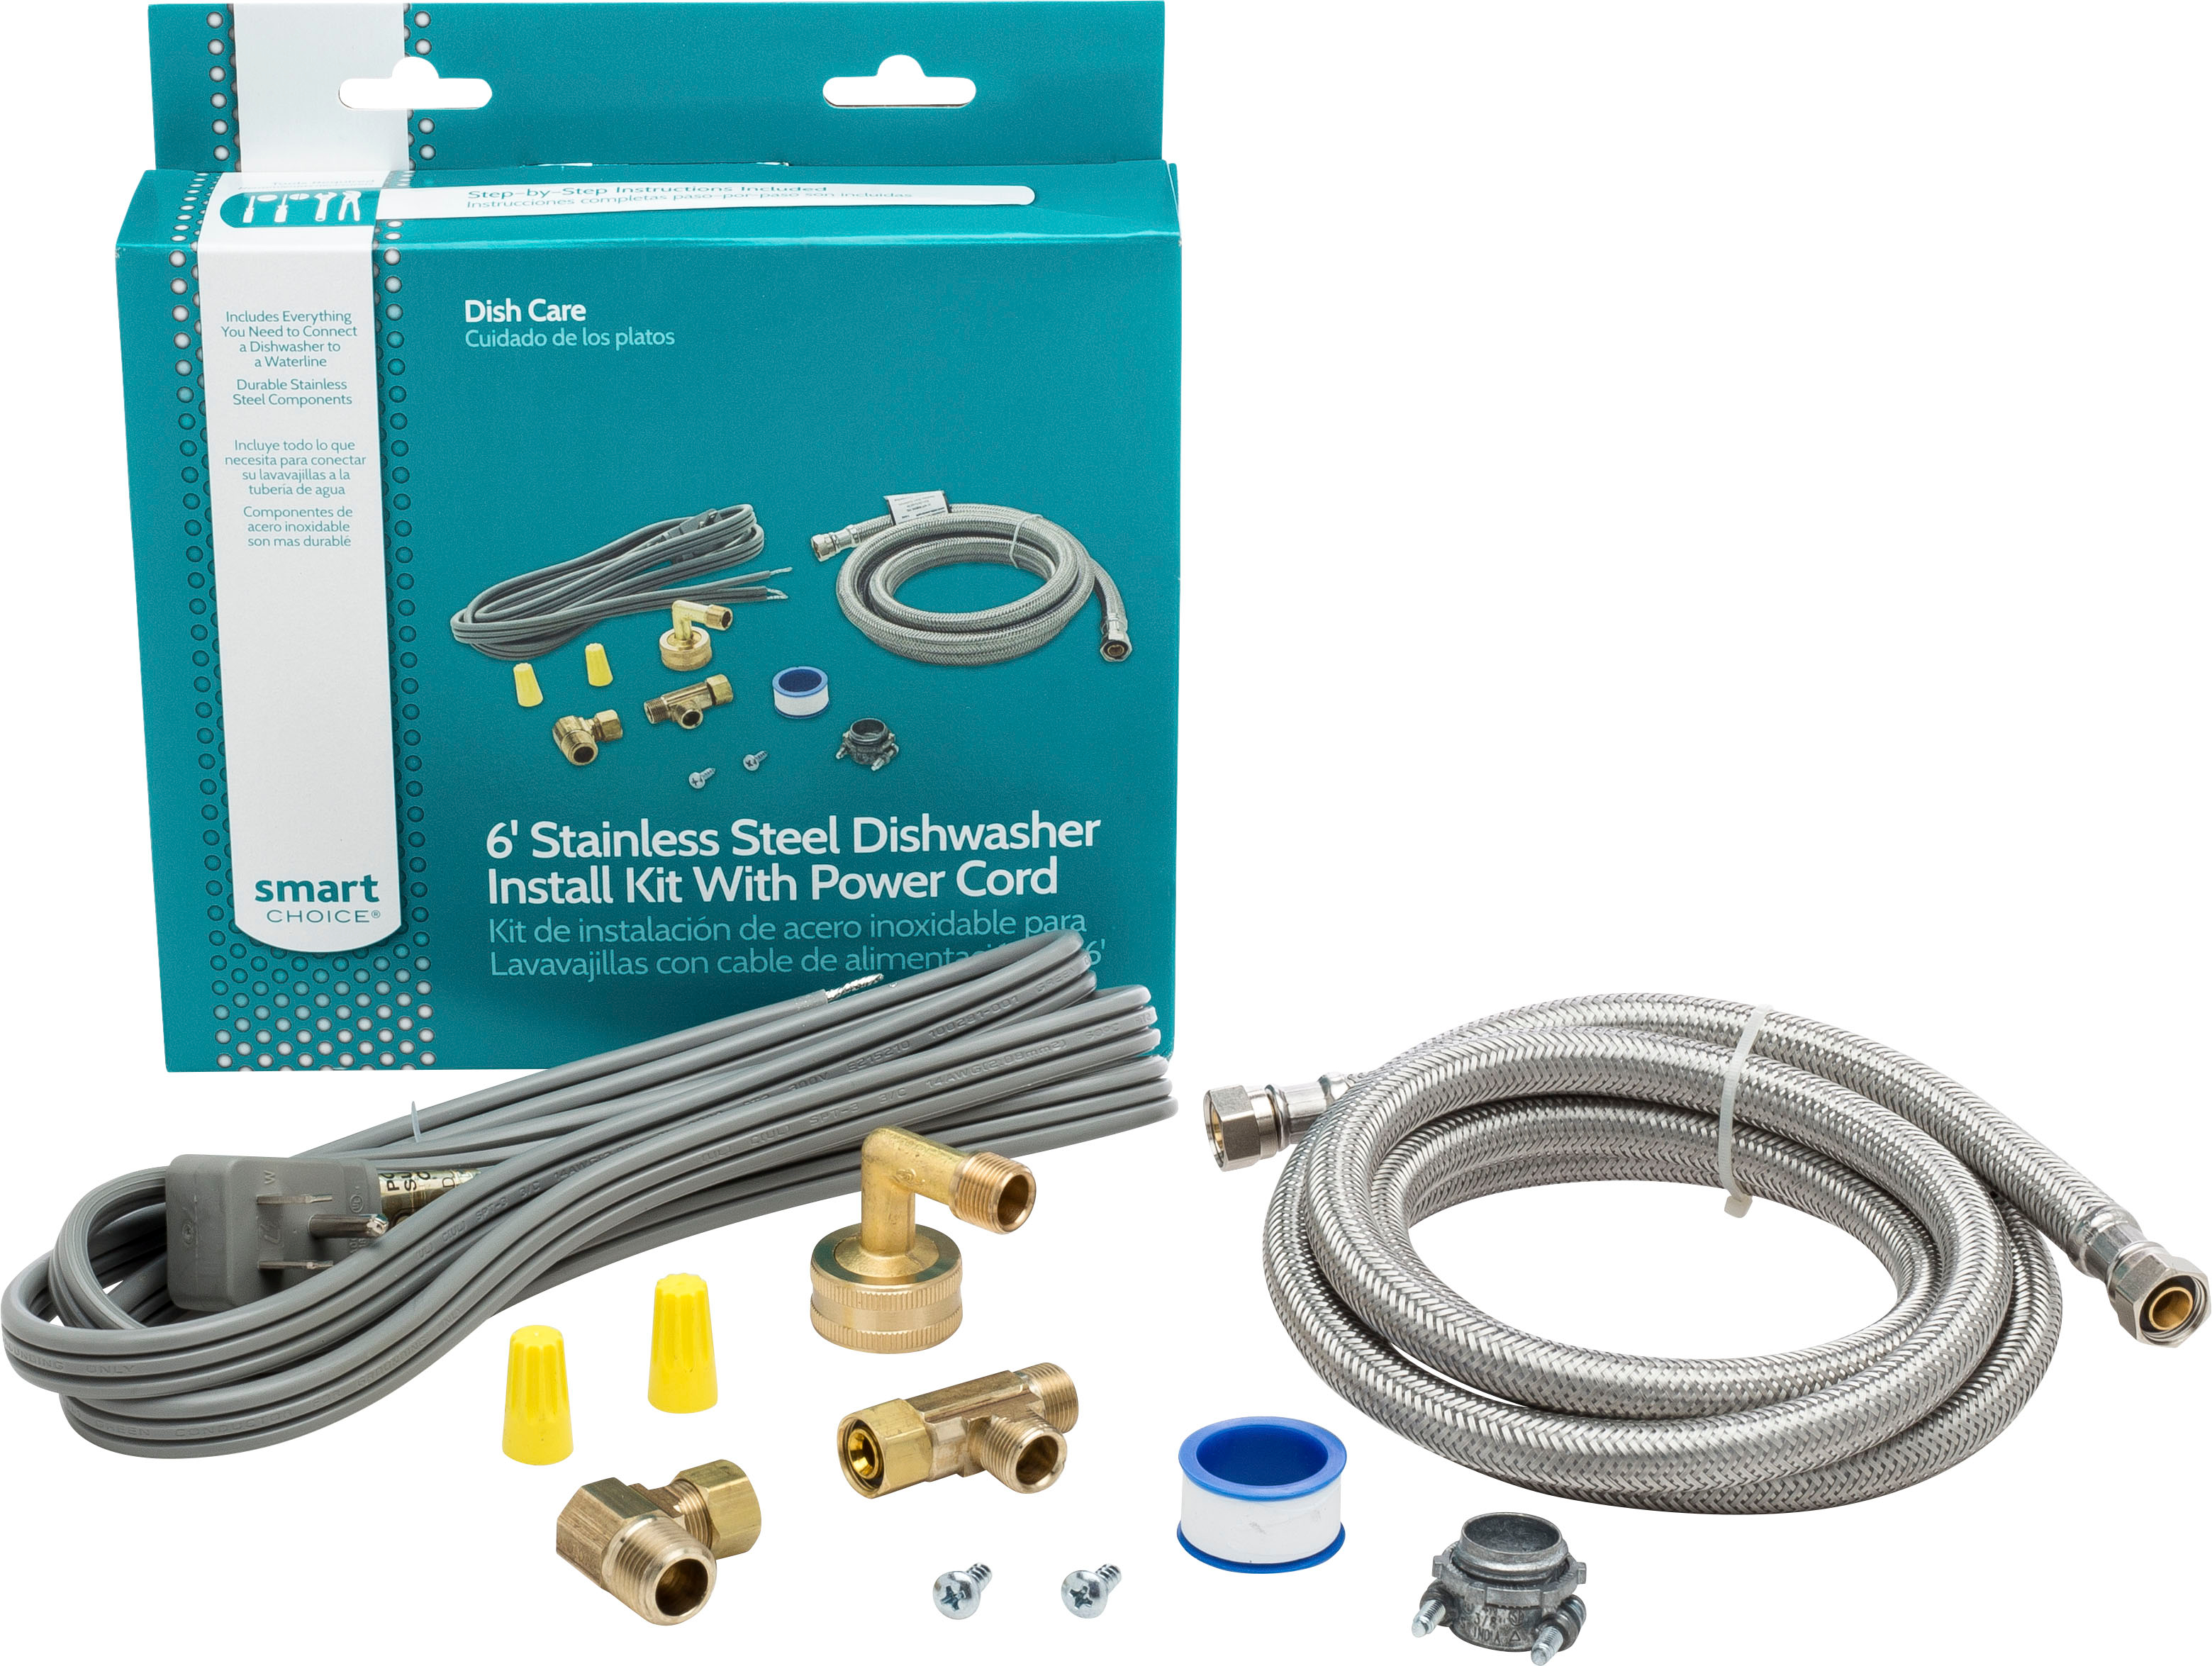 Smart Choice 6' Stainless Steel Dishwasher Install Kit with Power Cord 